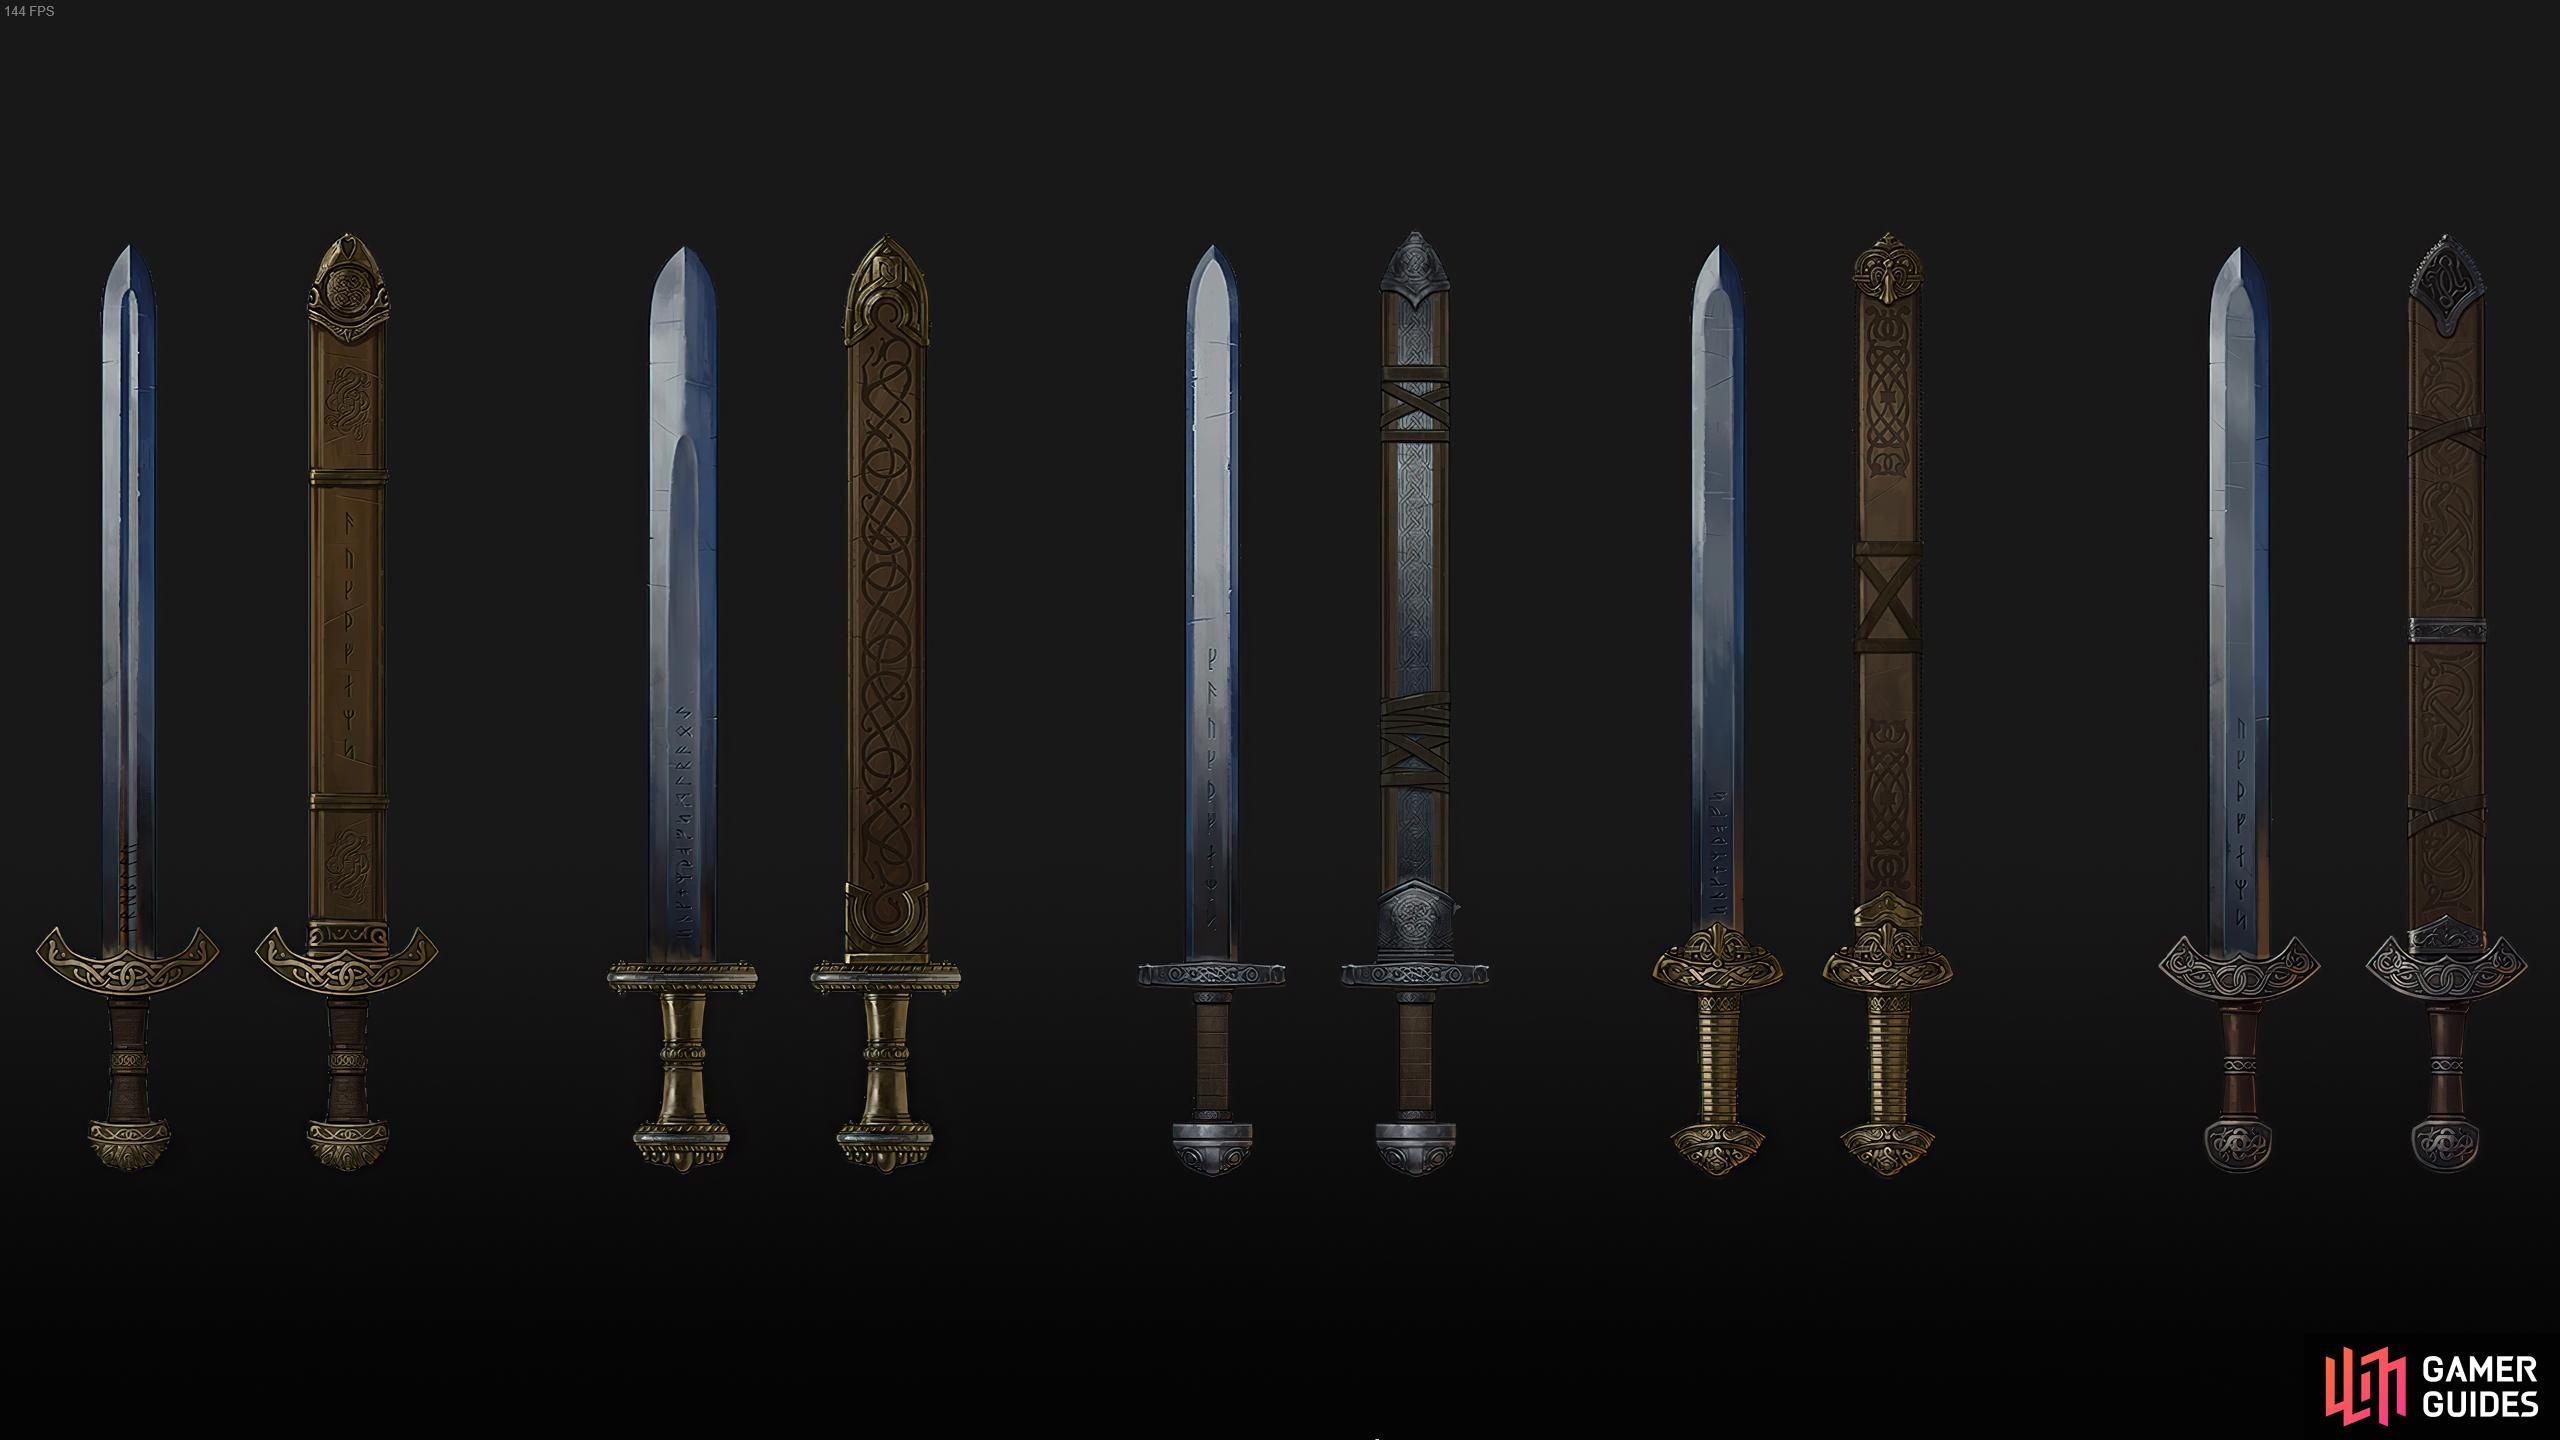 You can see a wide range of art for different weapon styles.